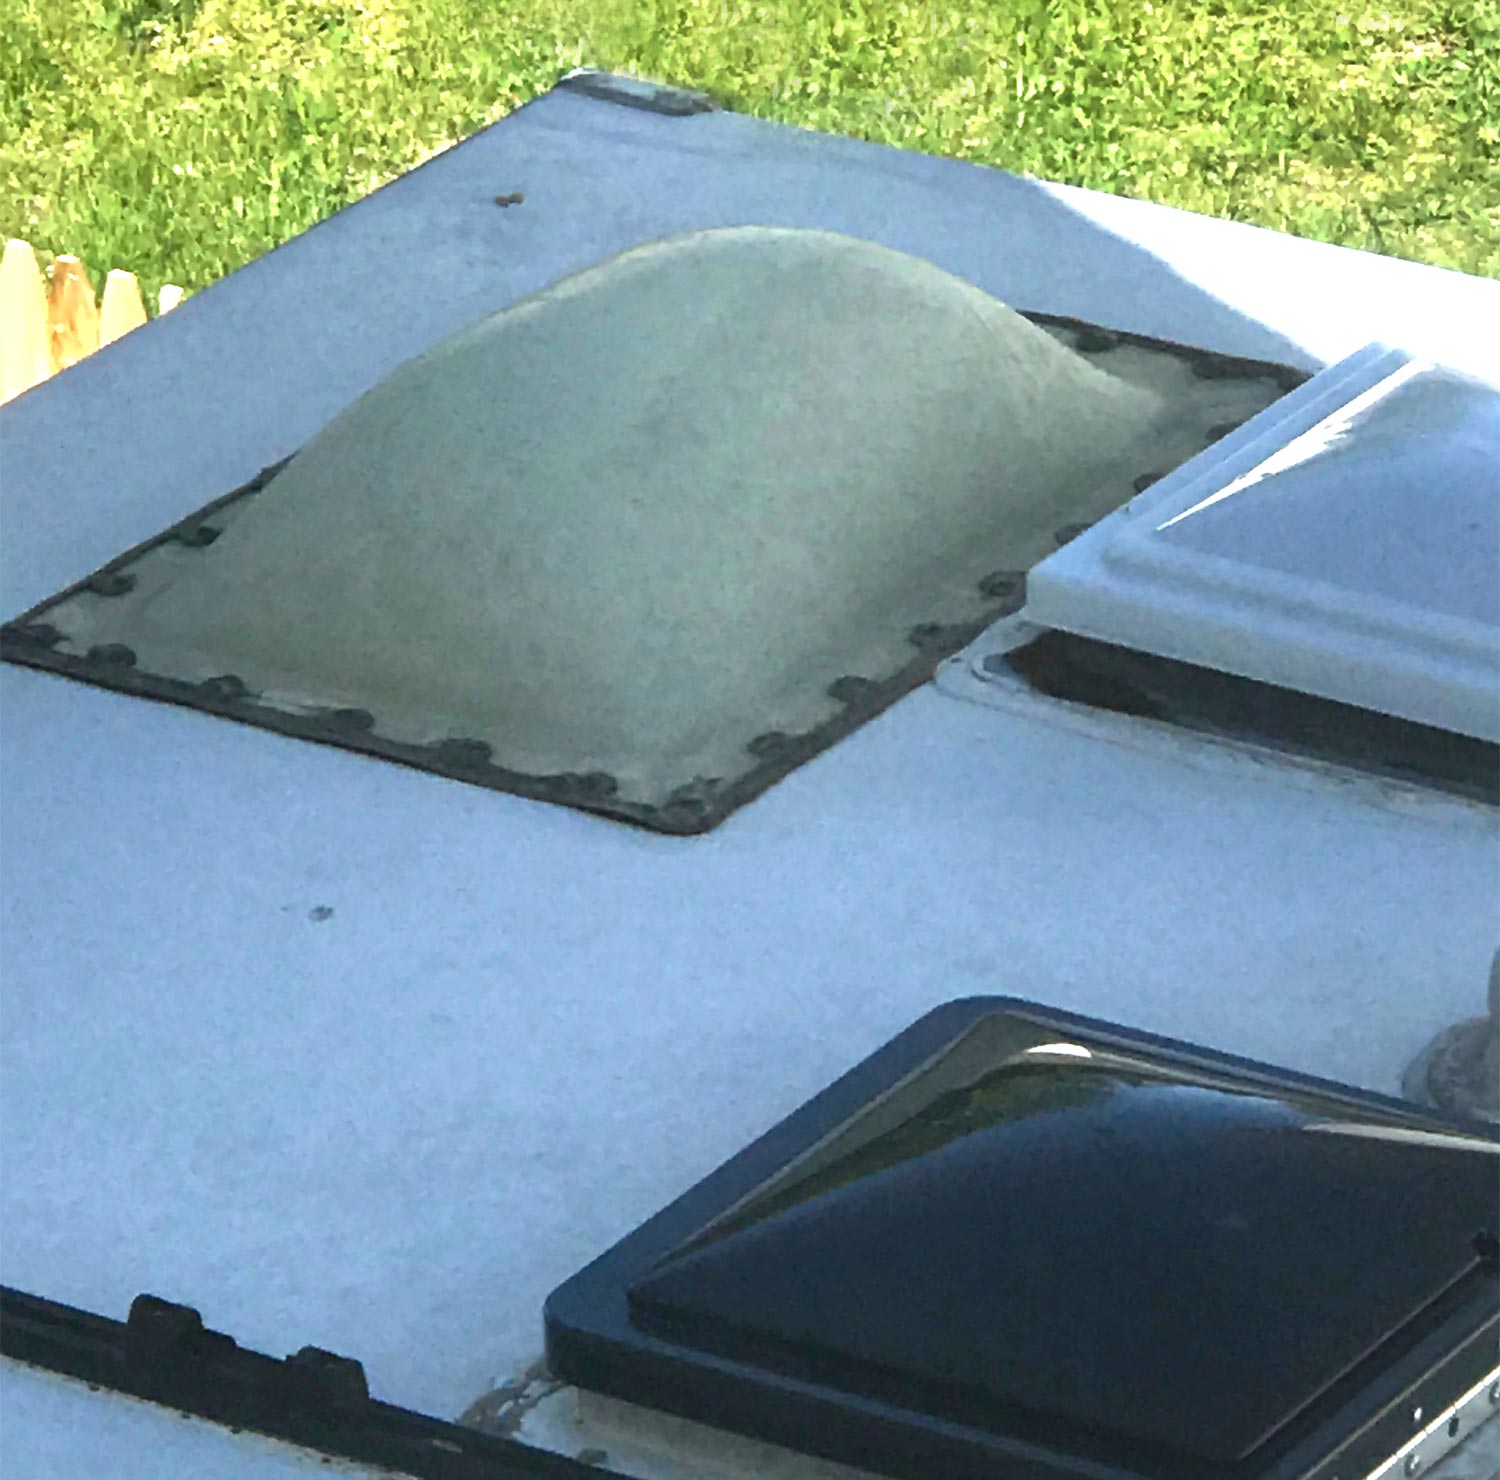 outside view of RV skylight